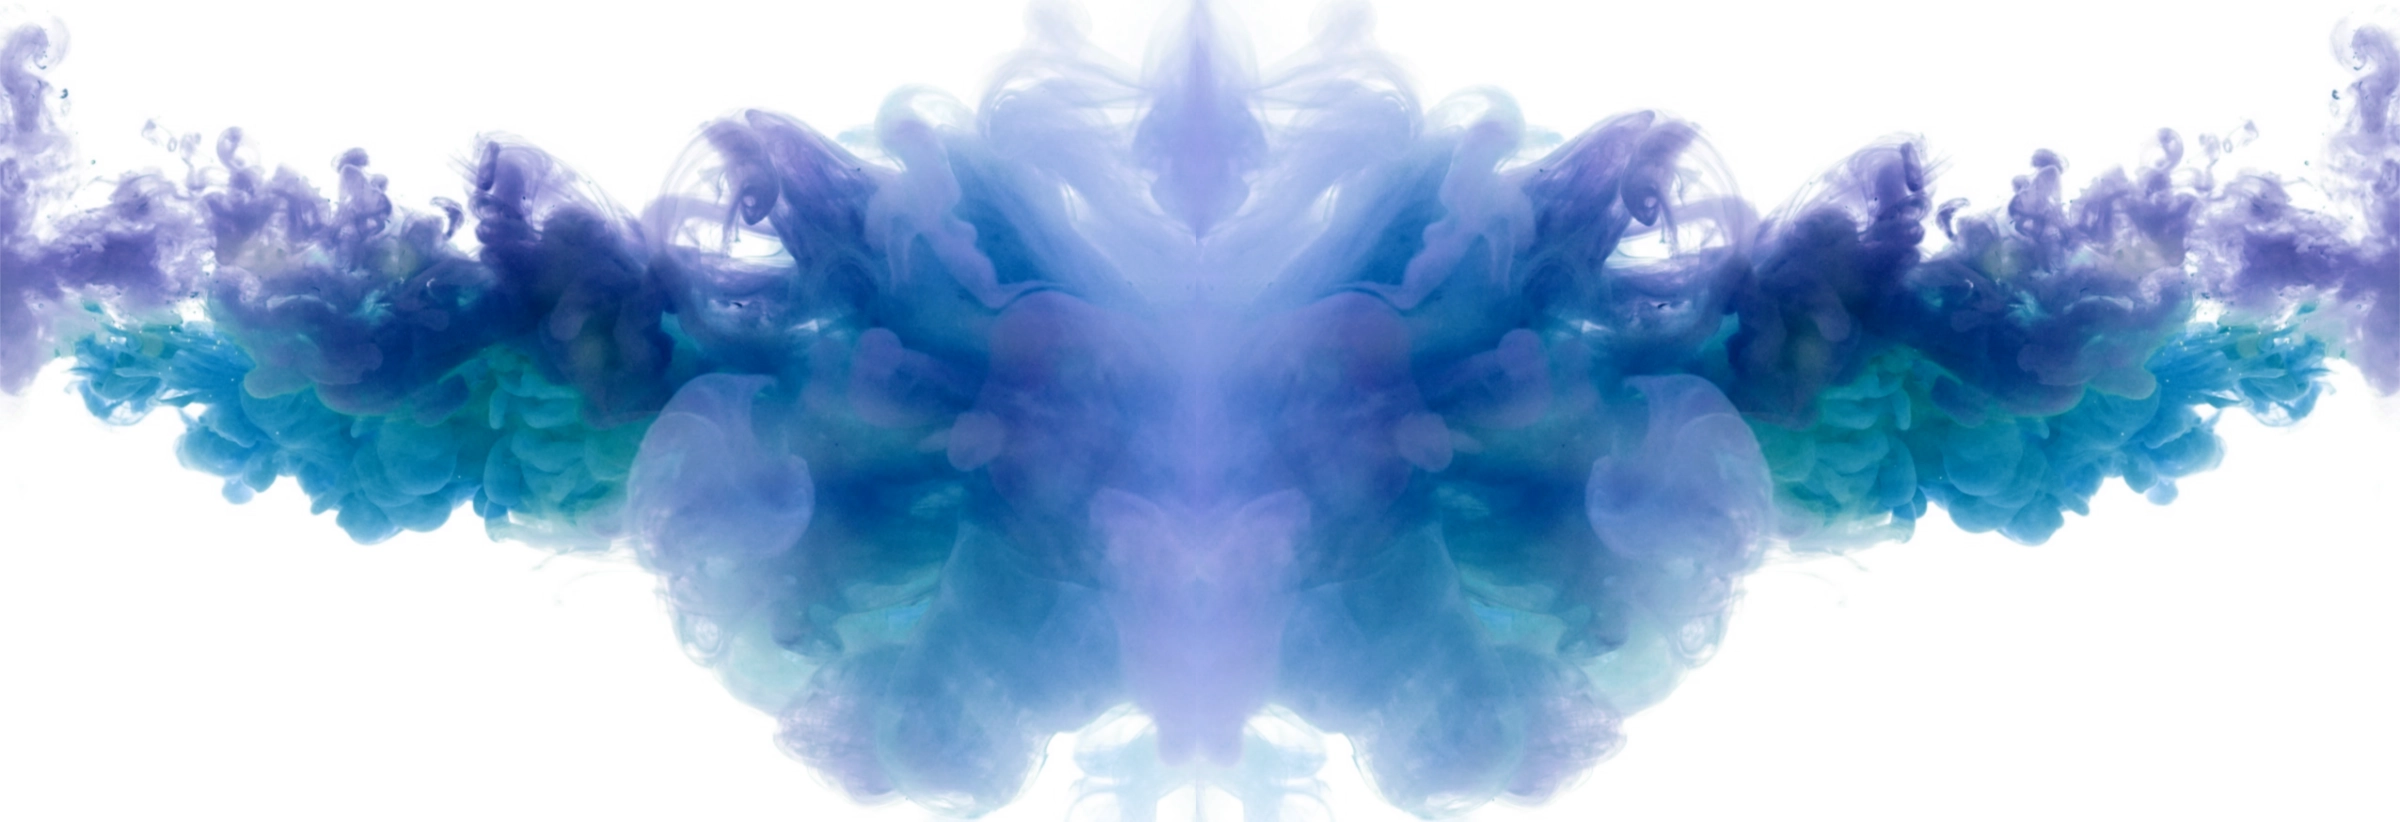 114-r313-blue-smoke-together-2-1566261712743.png